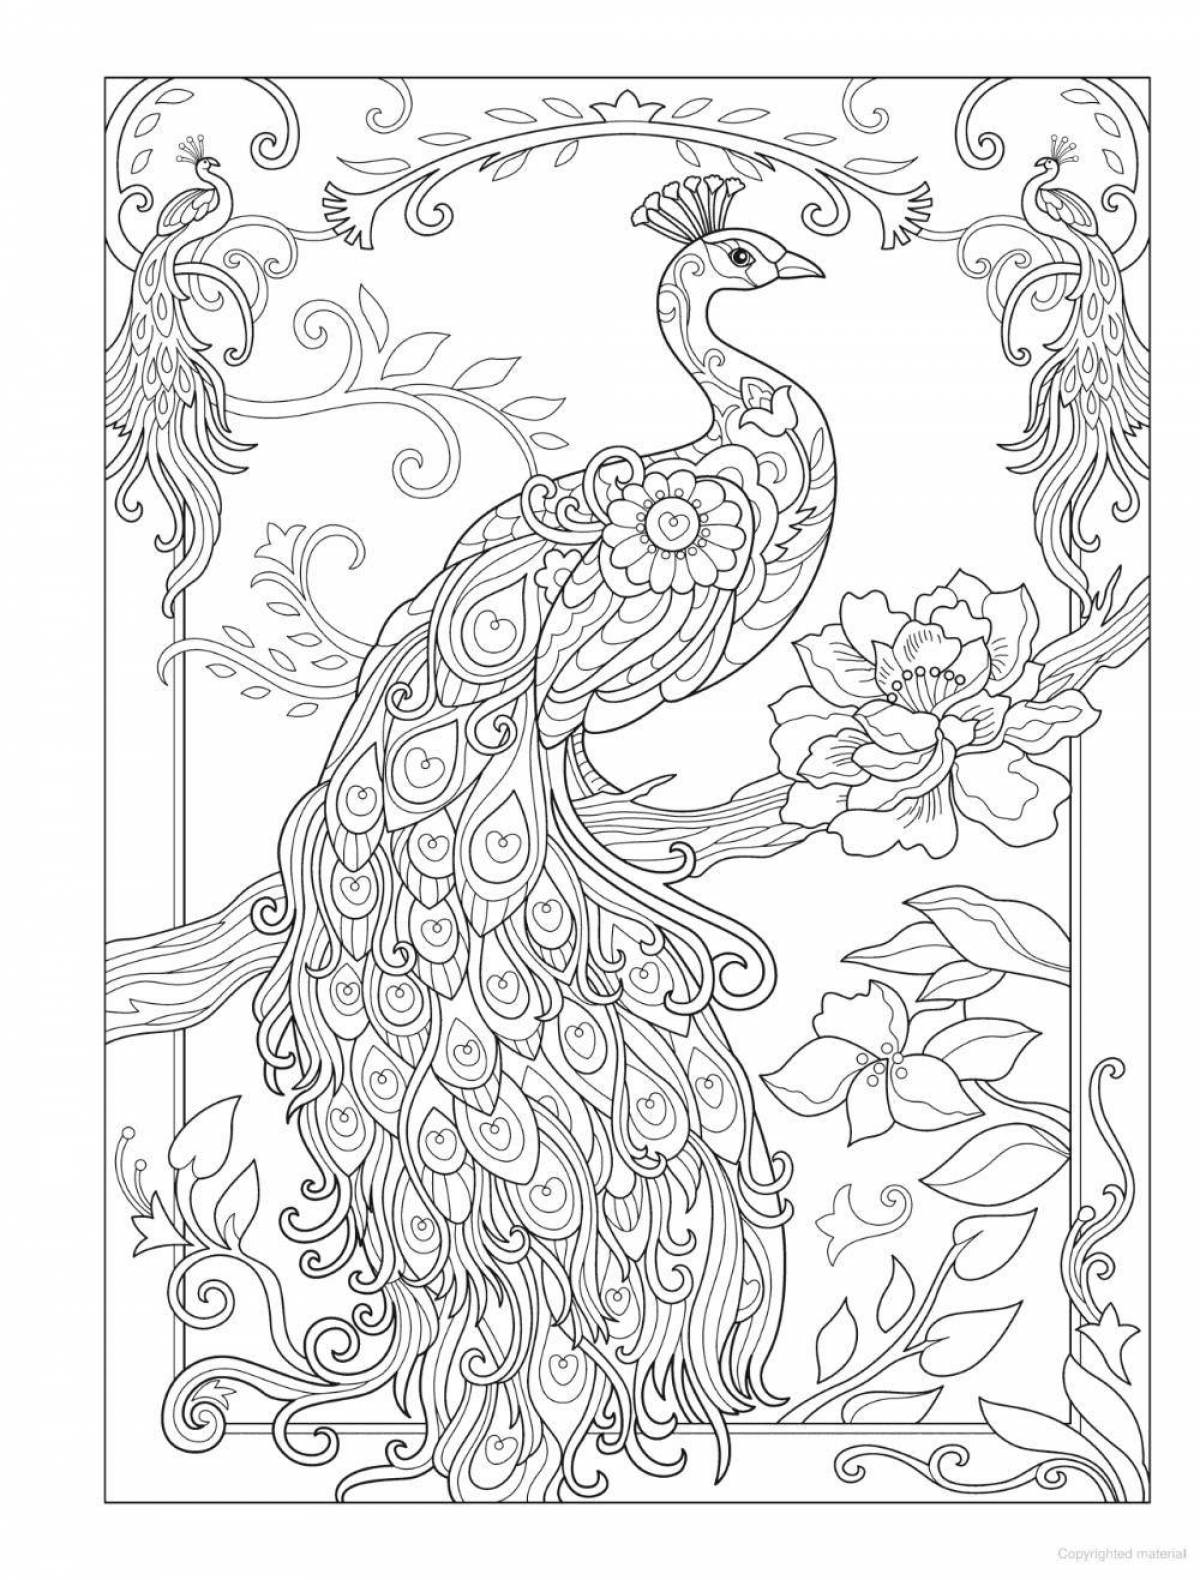 Glorious peacock coloring by numbers